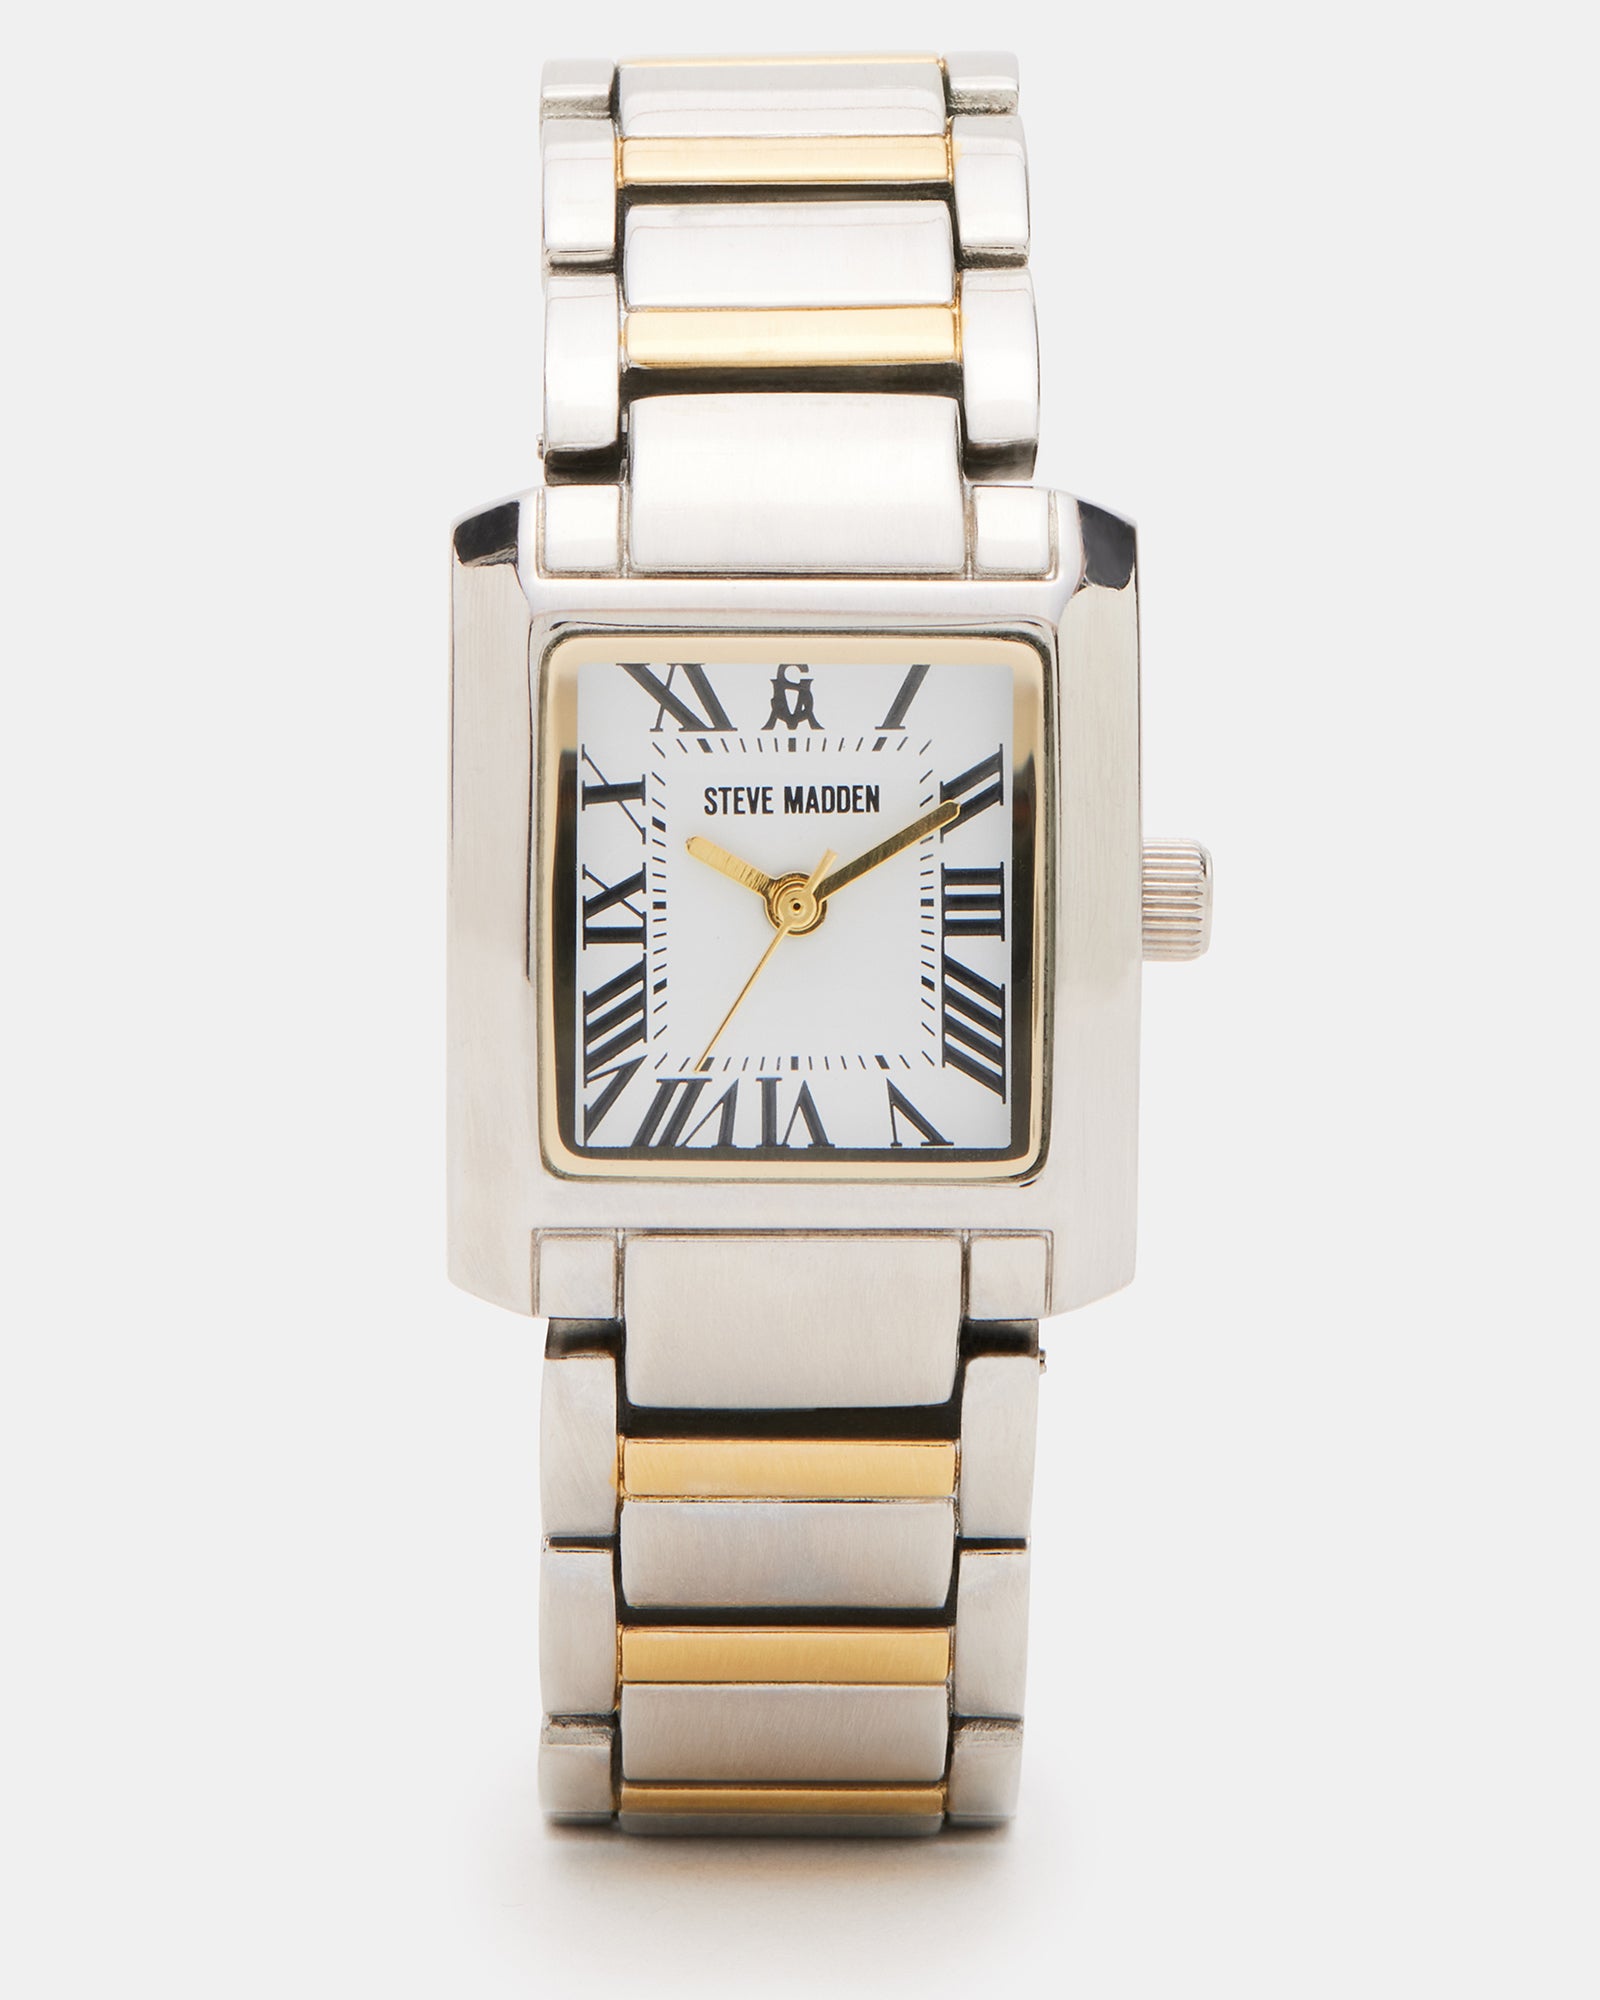 Steve Madden Printed Watch - FINAL SALE - Free Shipping